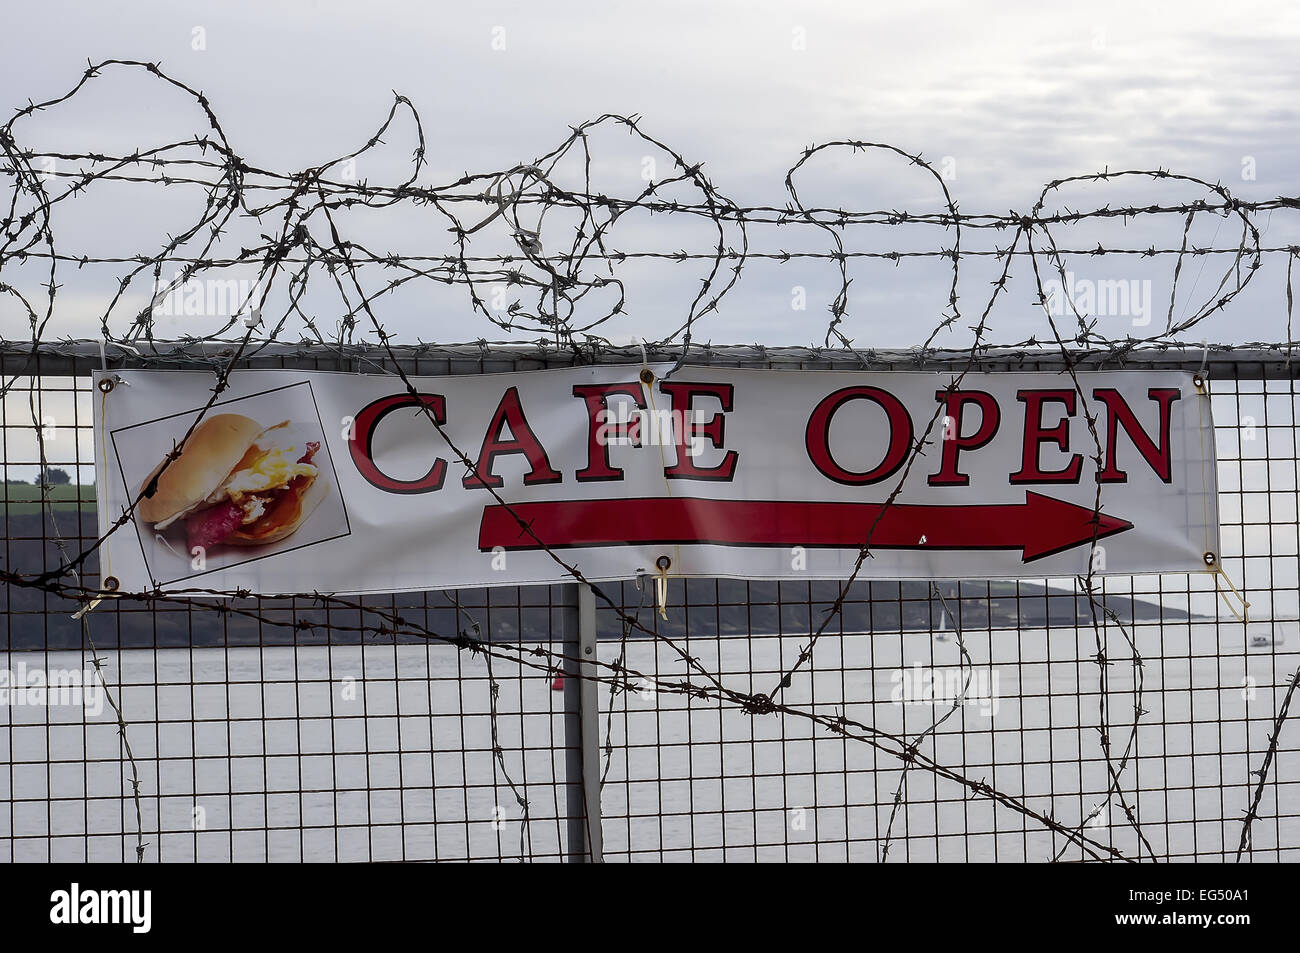 barbed wire,banner, advertising,fence,cafe open,arrow,sea Stock Photo